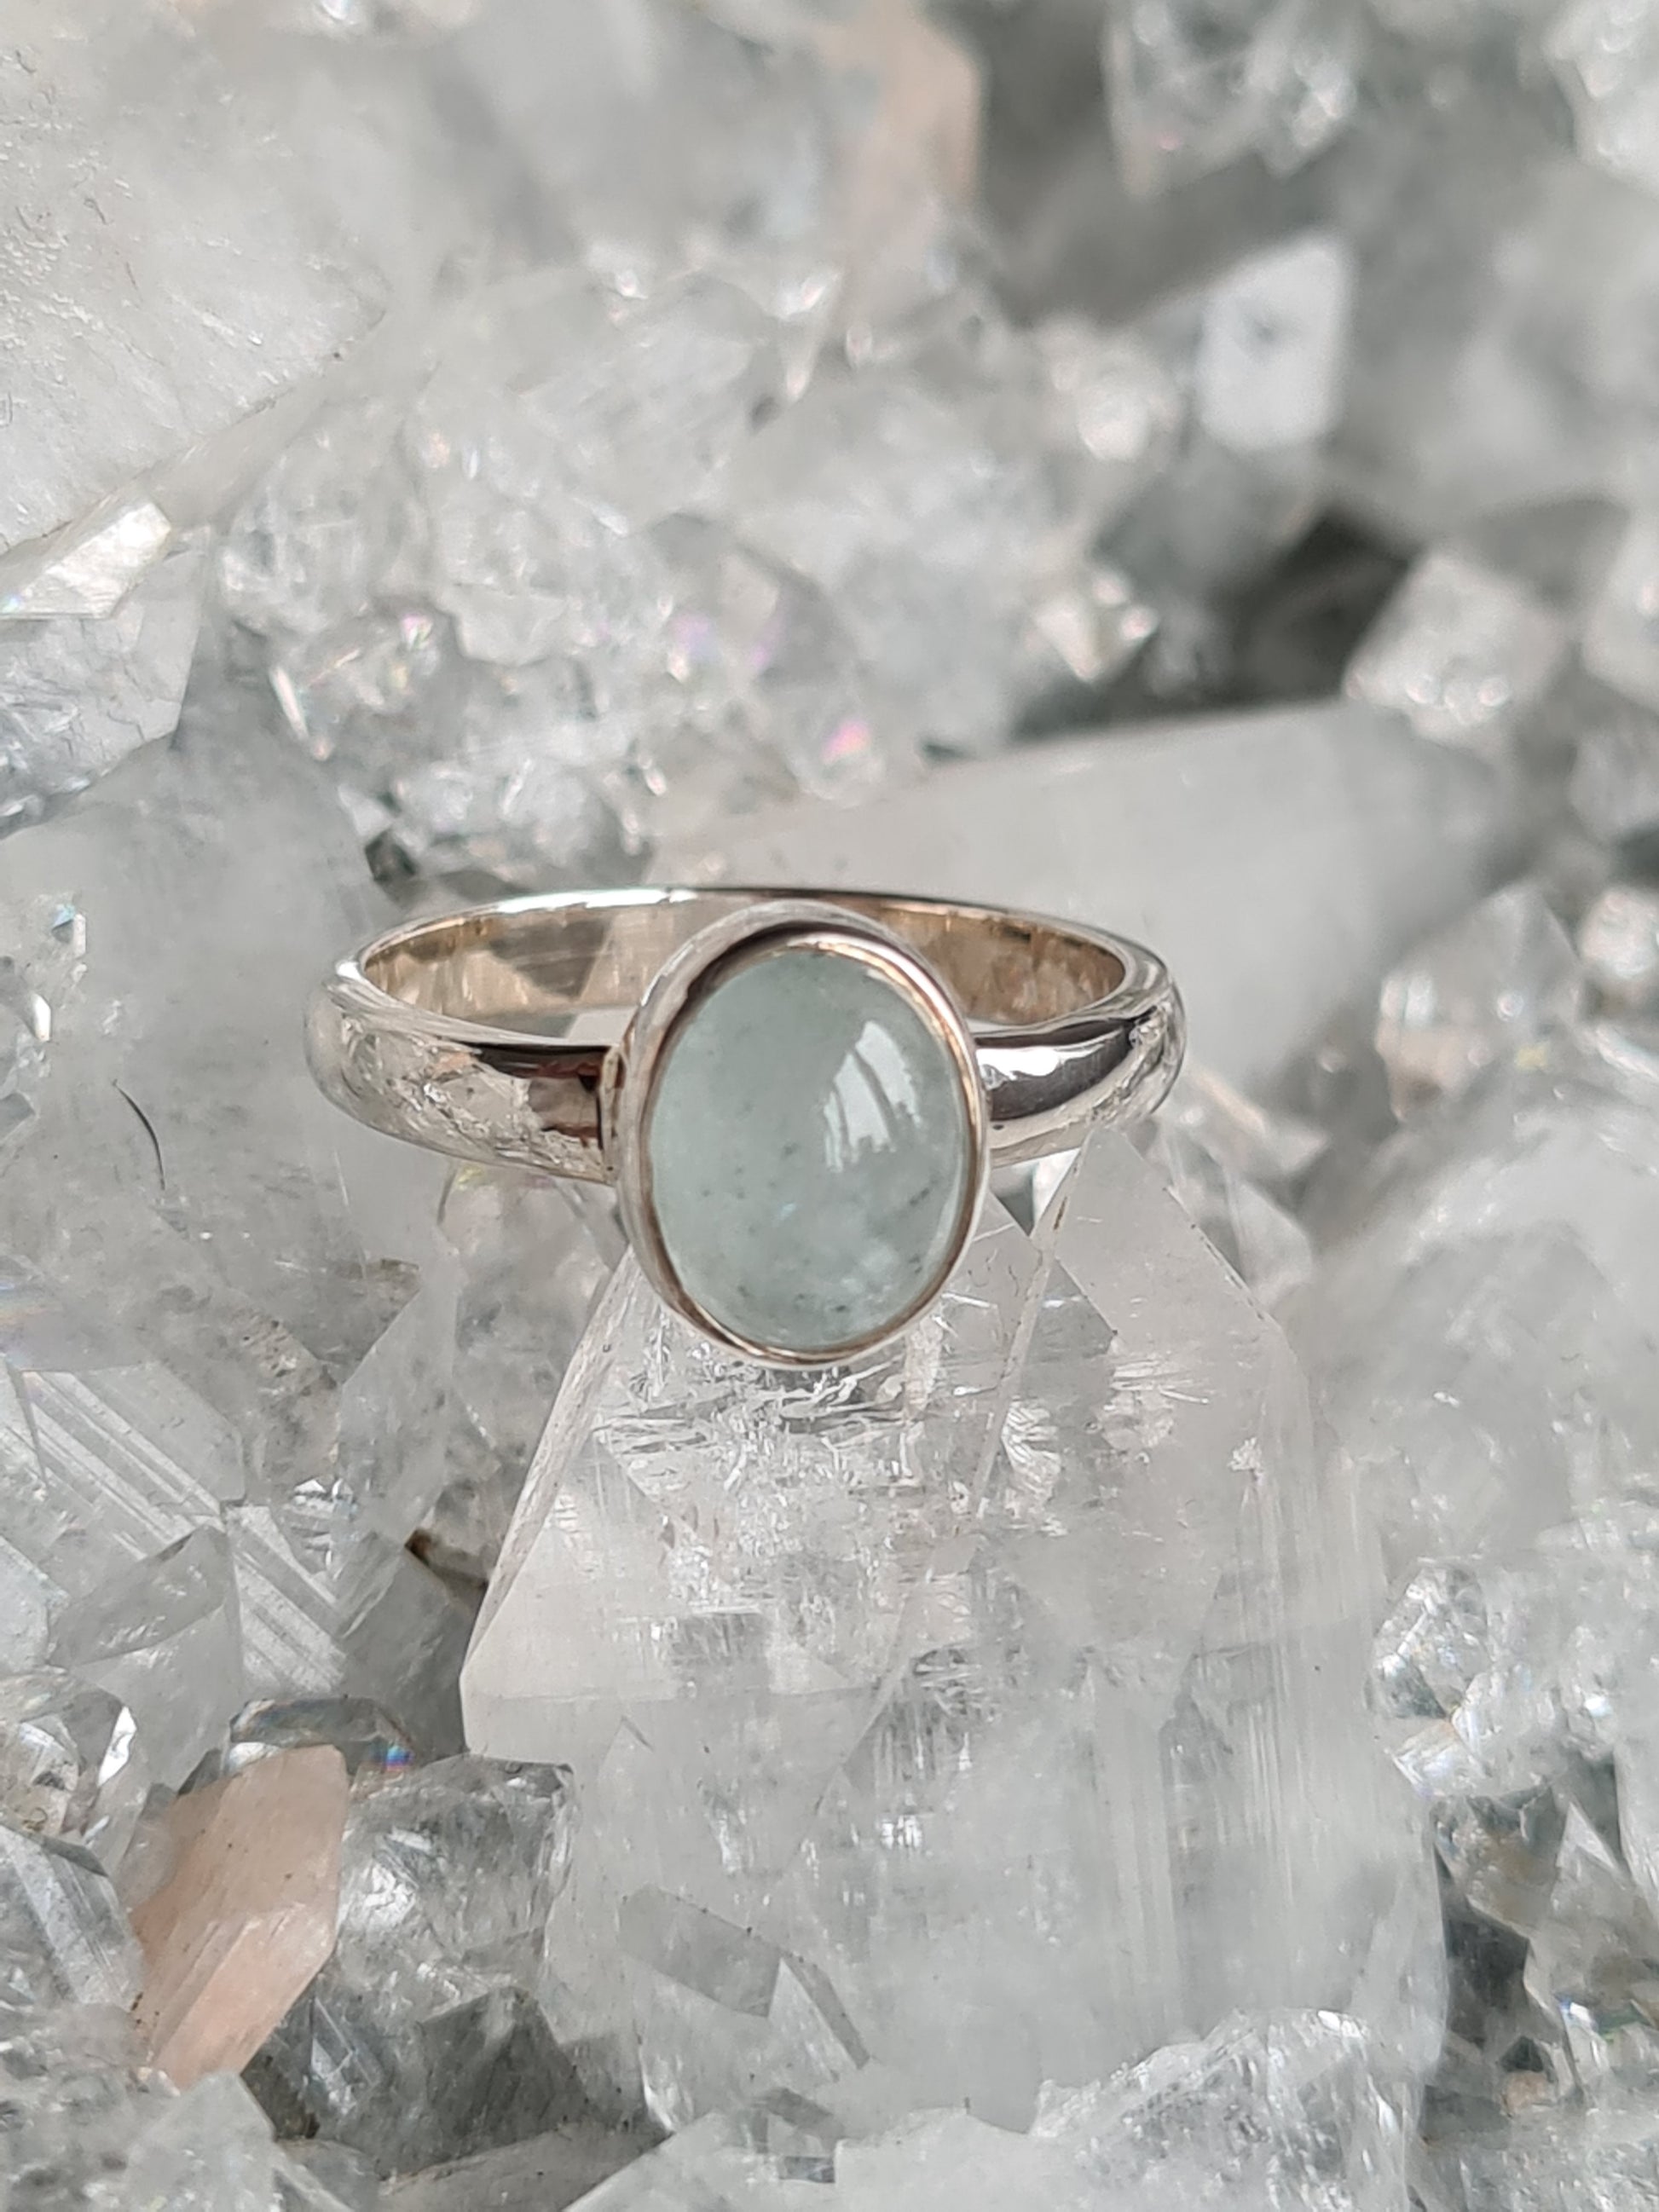 A rubover set Brazilian aquamarine cabochon, oval shaped, set into sterling silver with a solid D-shaped polished band. UK Size N